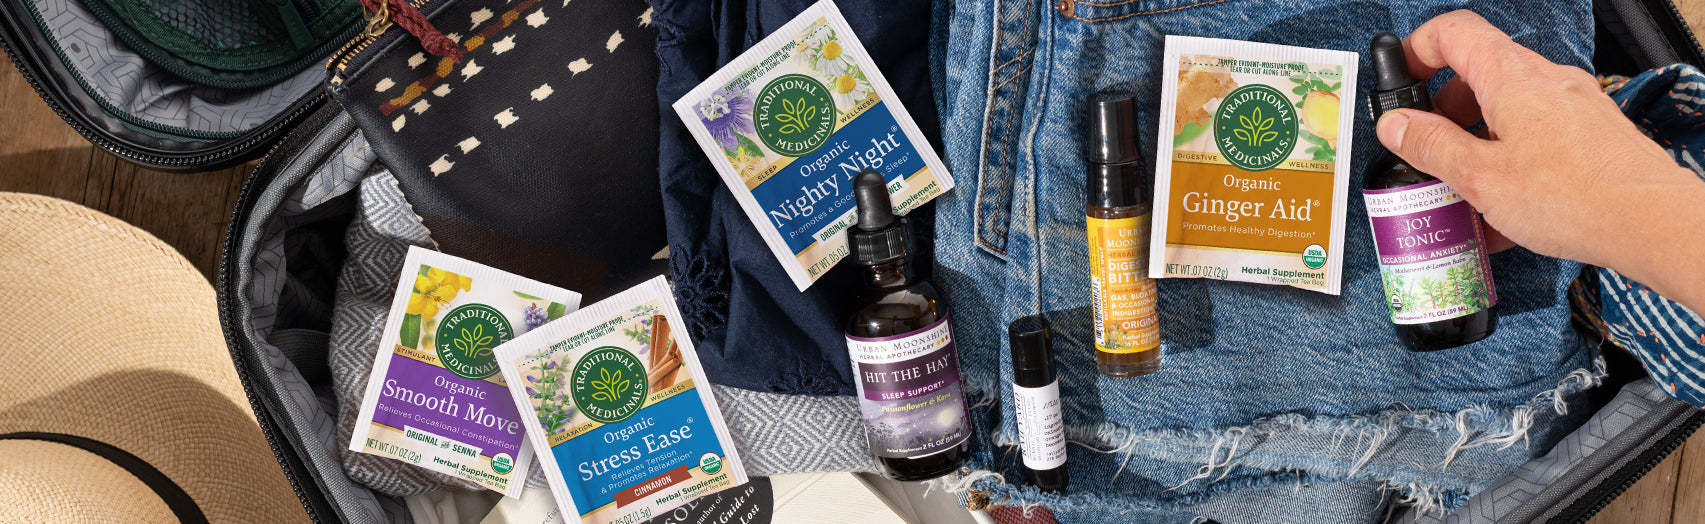 Various Traditional Medicinals tea overwraps and Urban Moonshine tinctures laid out in a suitcase amongst clothing